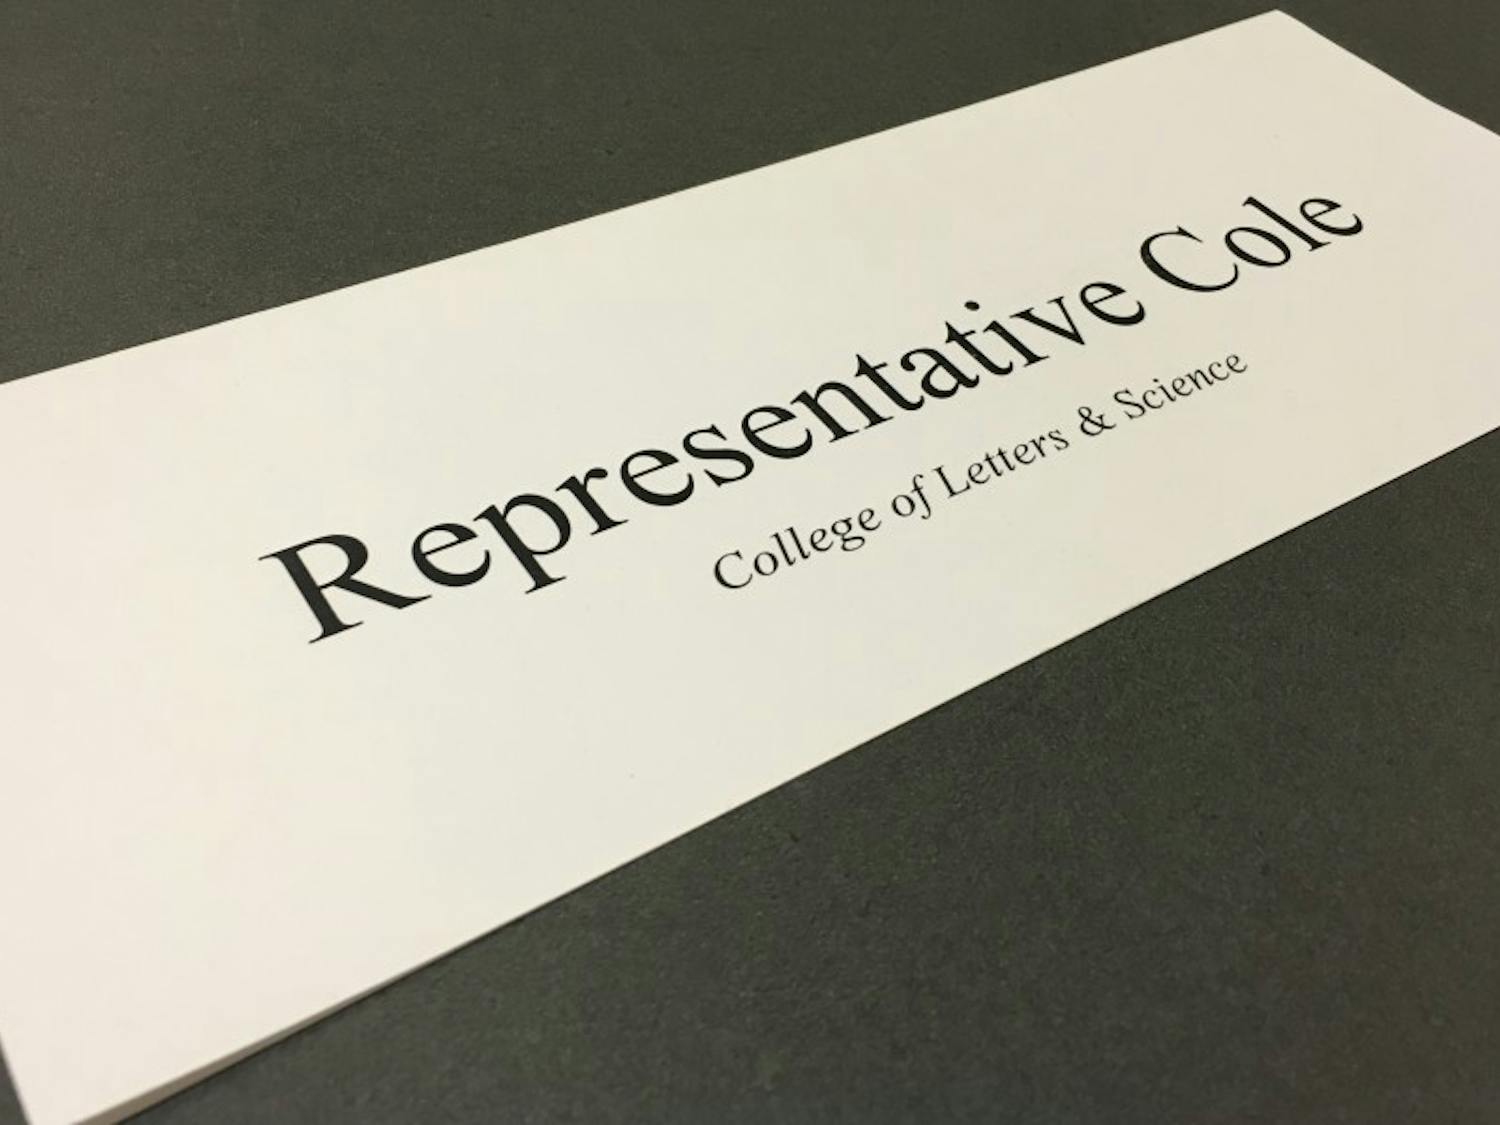 Associated Students of Madison Representative Kenneth Cole sent a letter to the members of the Student Services Finance Committee Thursday, announcing his resignation from the group and ASM as a whole.